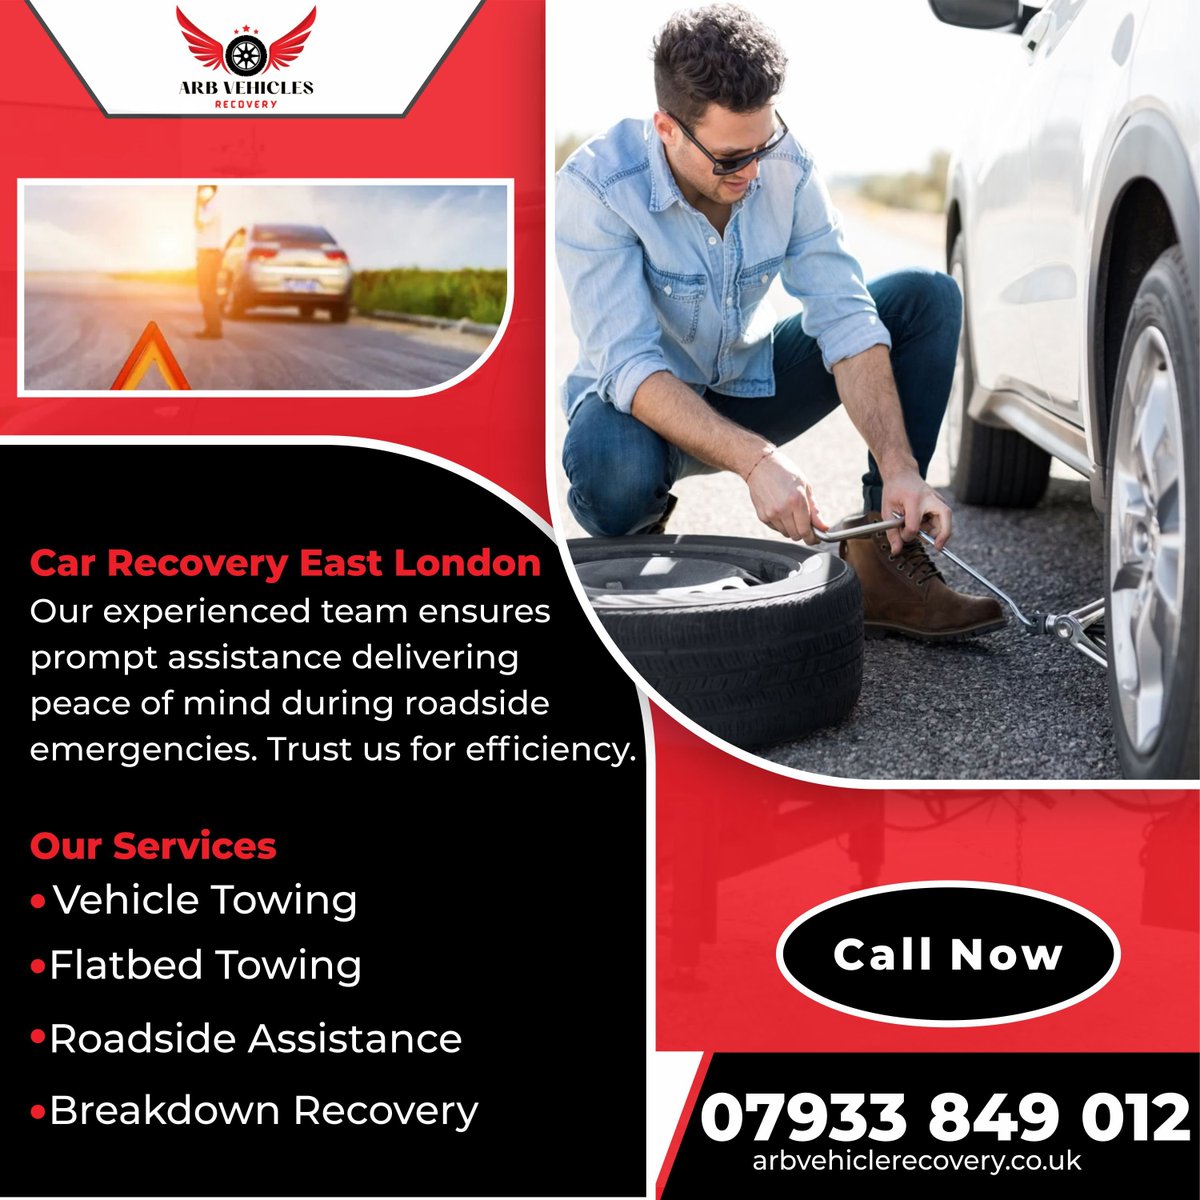 ARB Vehicle Recovery provides swift and reliable car recovery services in East London. Trust us for efficient and professional assistance whenever you need it.

arbvehiclerecovery.co.uk
#ARBVehicleRecovery
#EastLondonRecovery
#CarRescueLondon
#EmergencyRecovery
#CaistorParkRoad